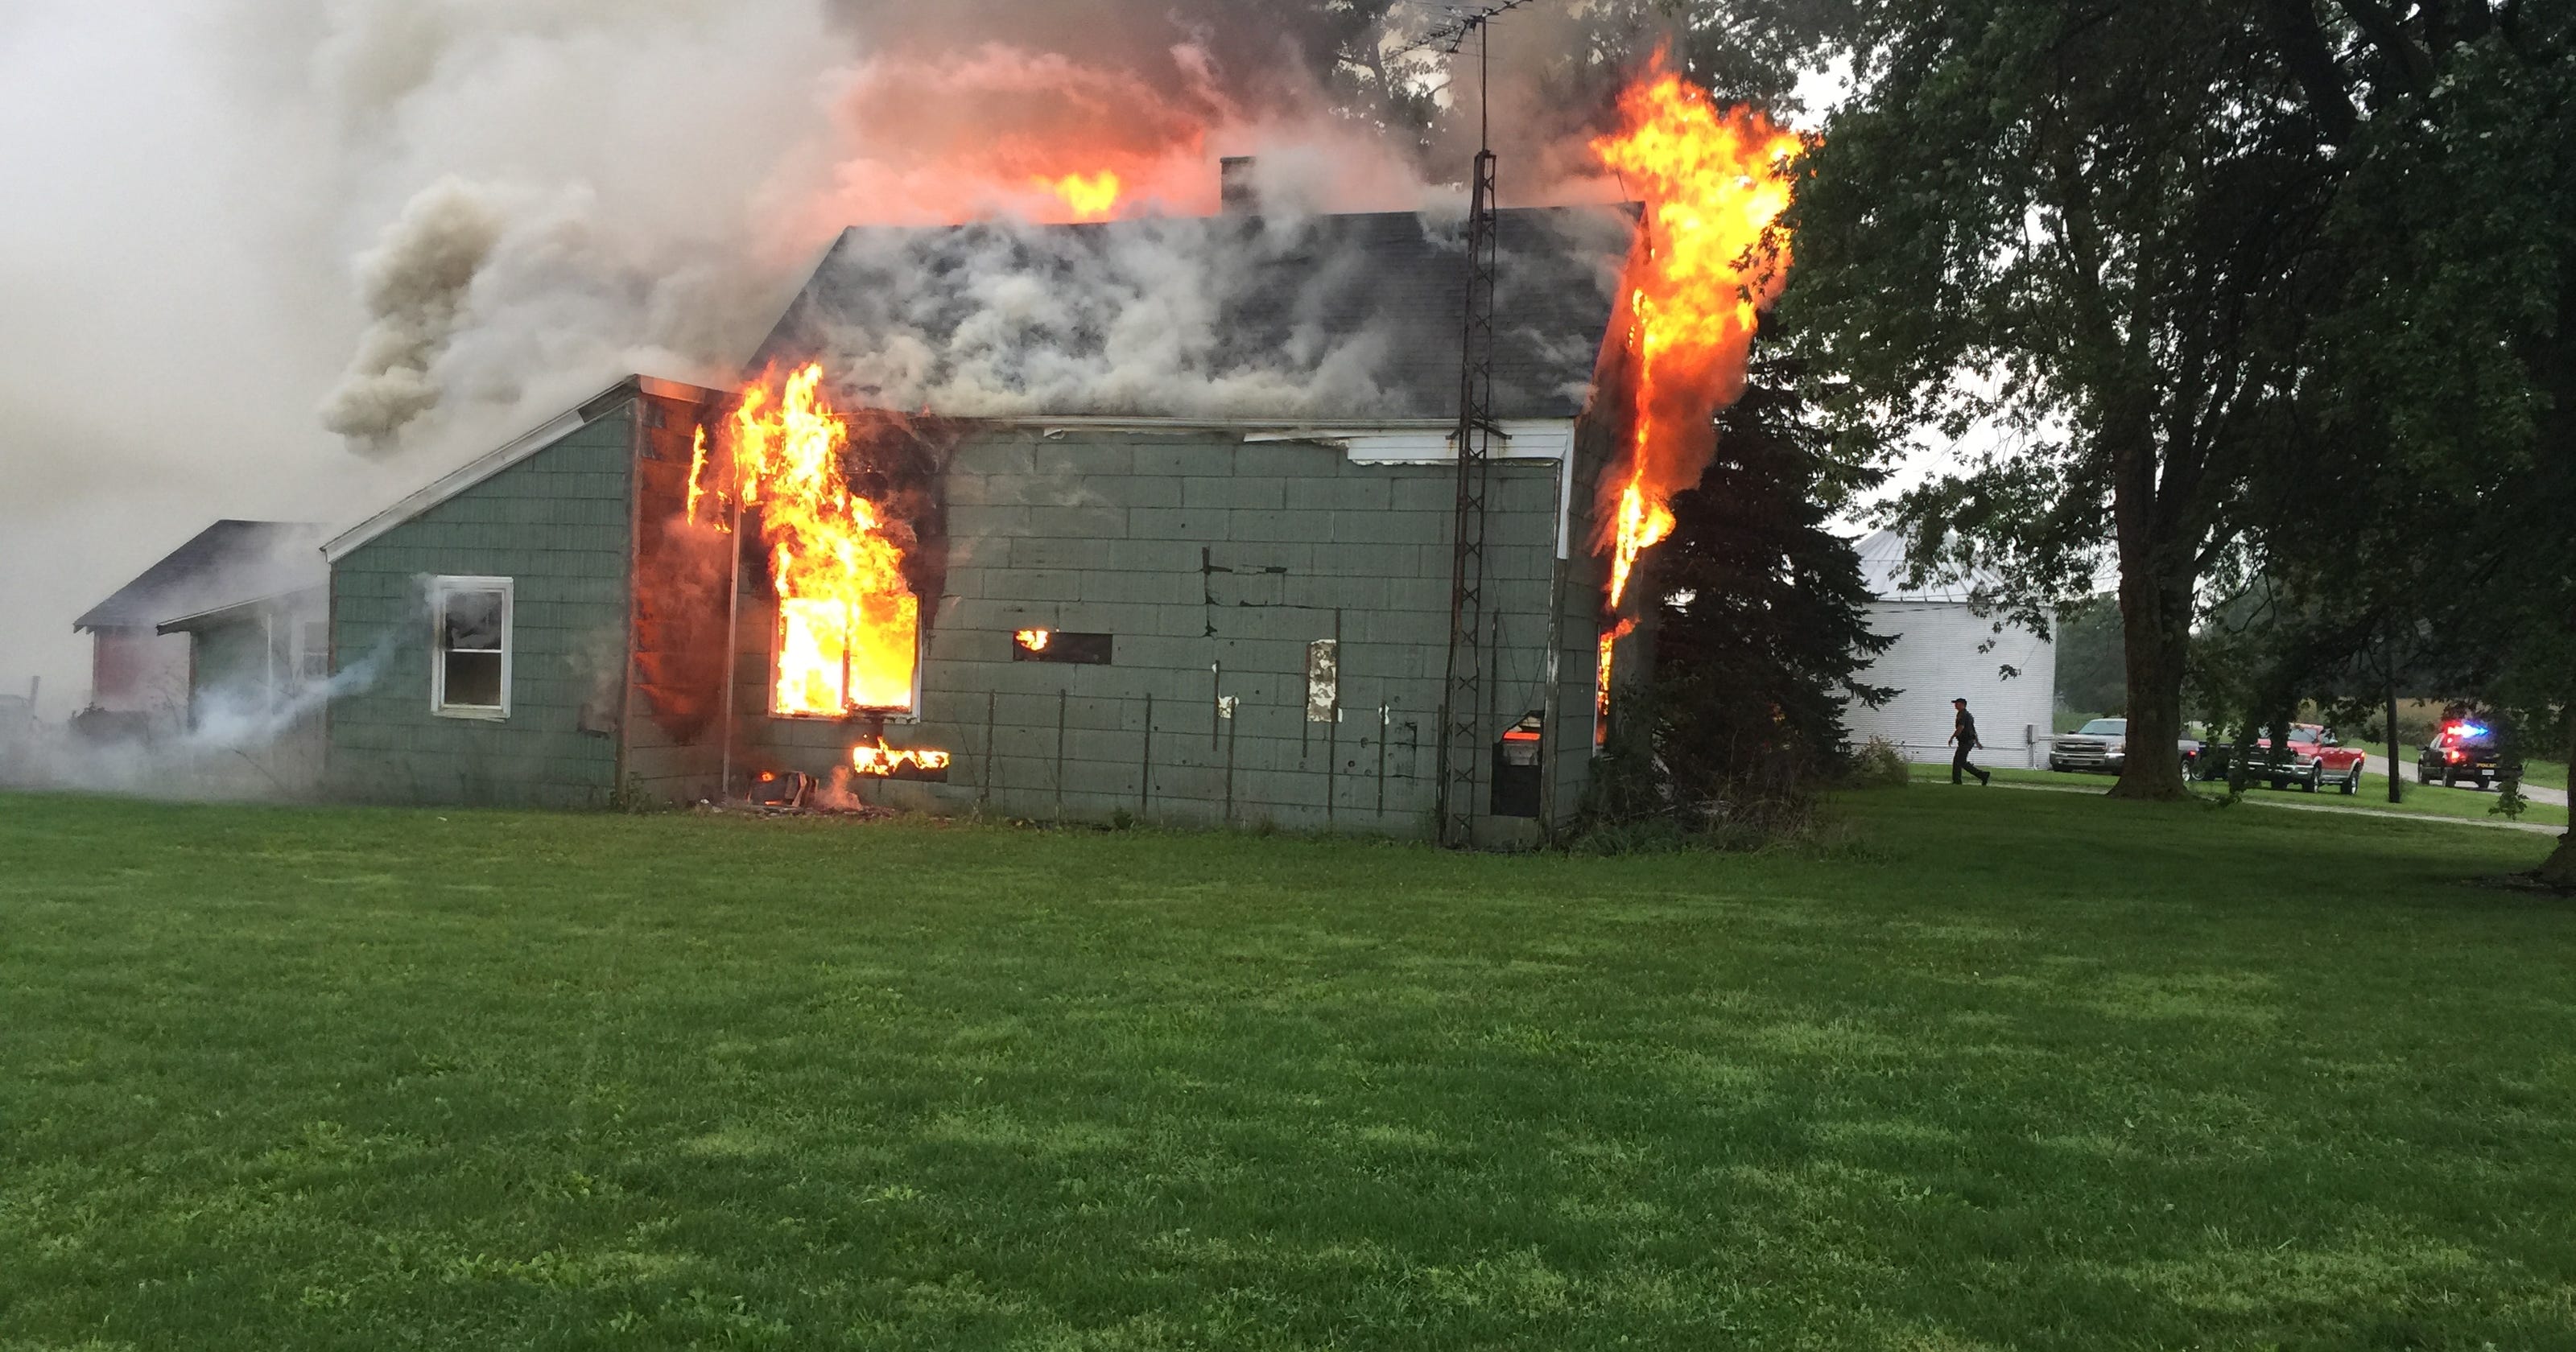 Fire destroys home in rural Clinton County